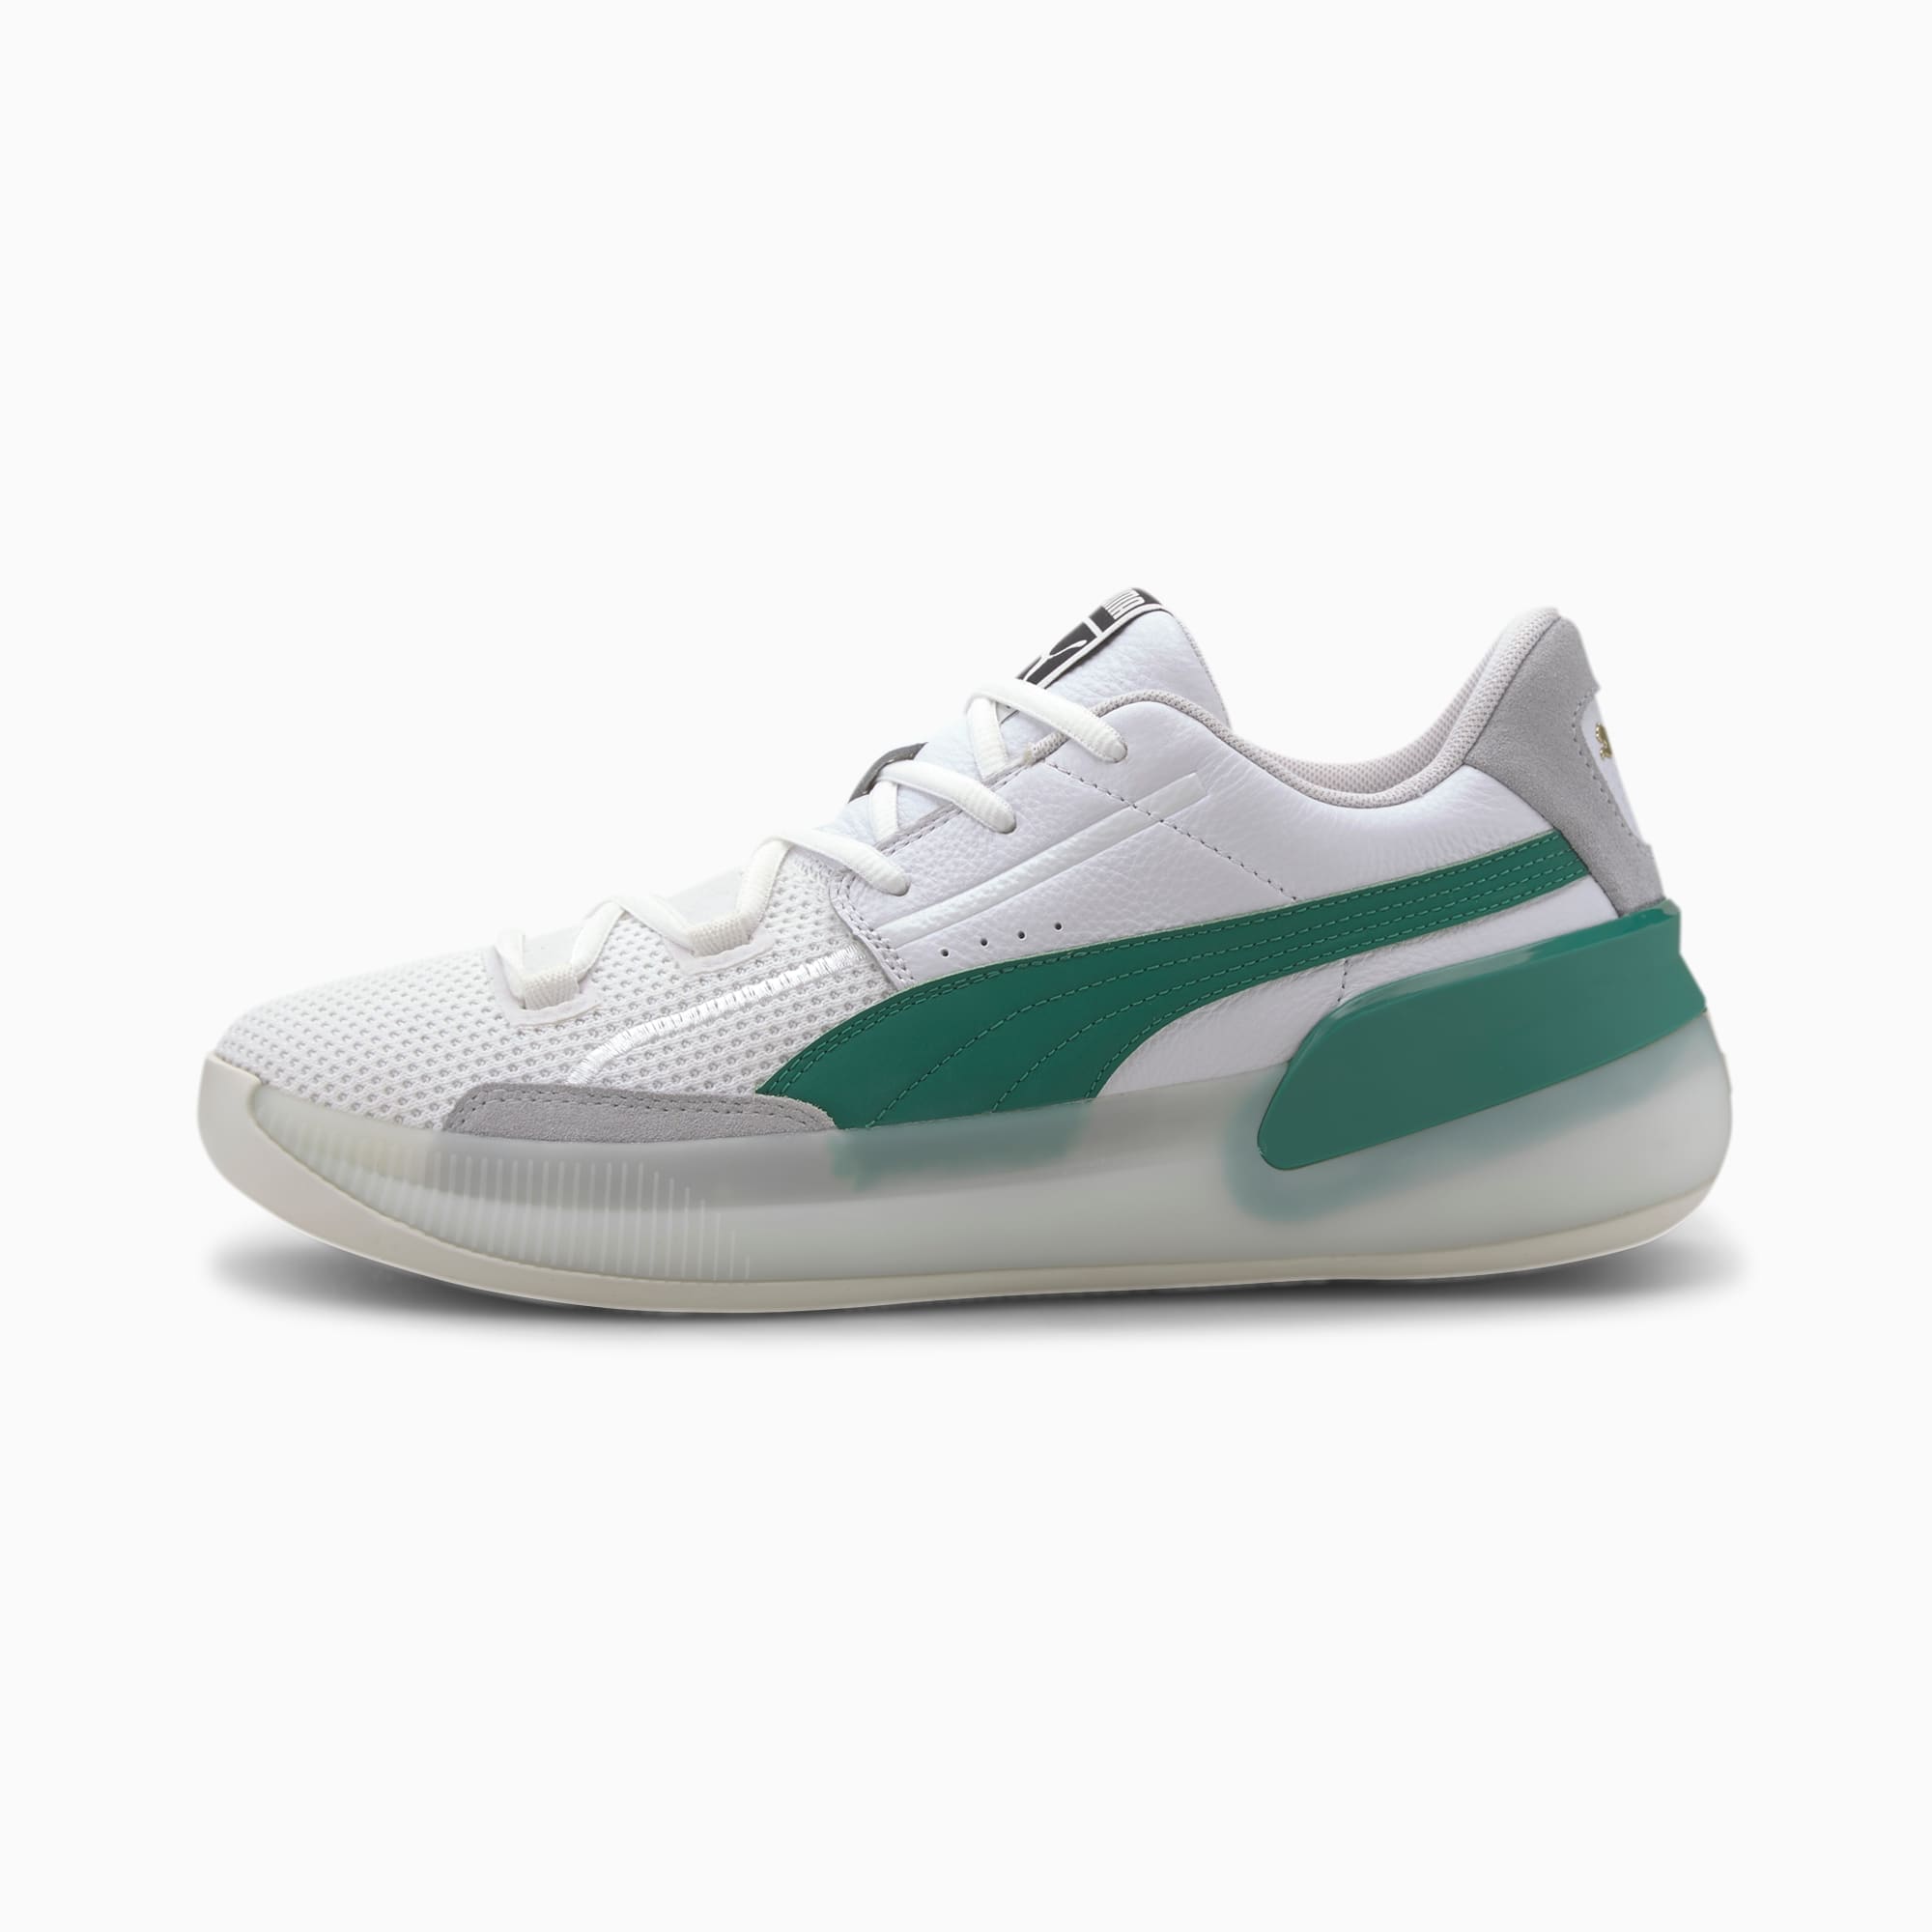 Clyde Hardwood Basketball Shoes, Puma White-Power Green, large-SEA